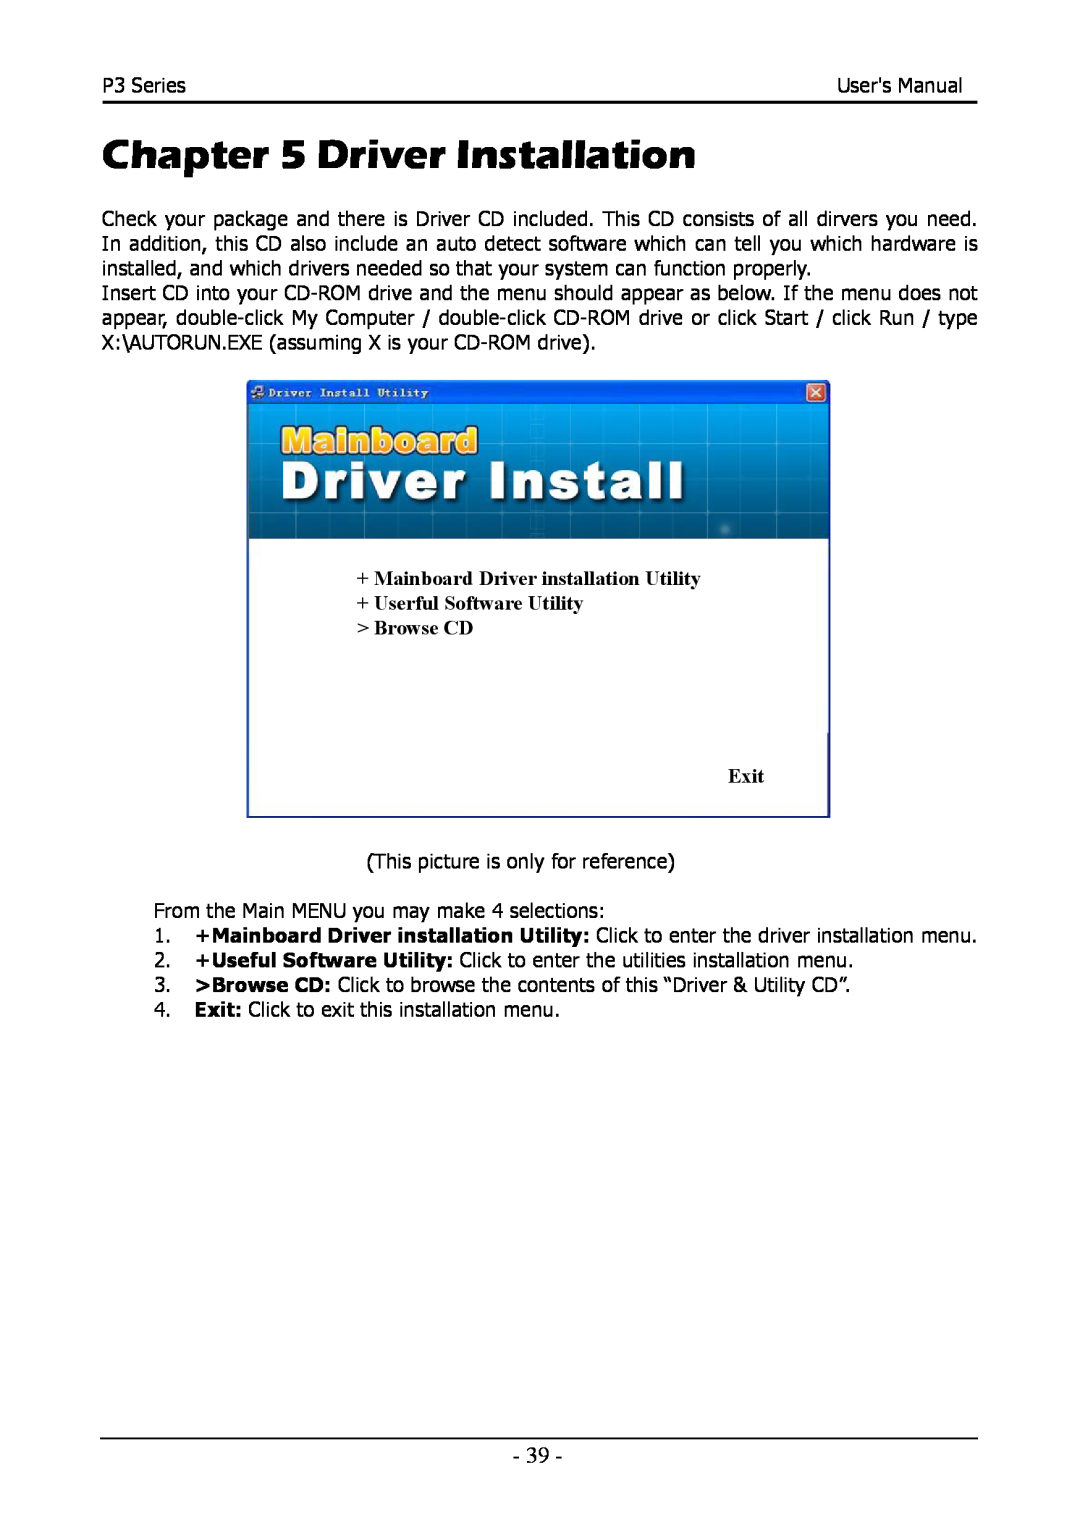 Intel 88ENEP3S00 Driver Installation, + Mainboard Driver installation Utility + Userful Software Utility, Browse CD Exit 